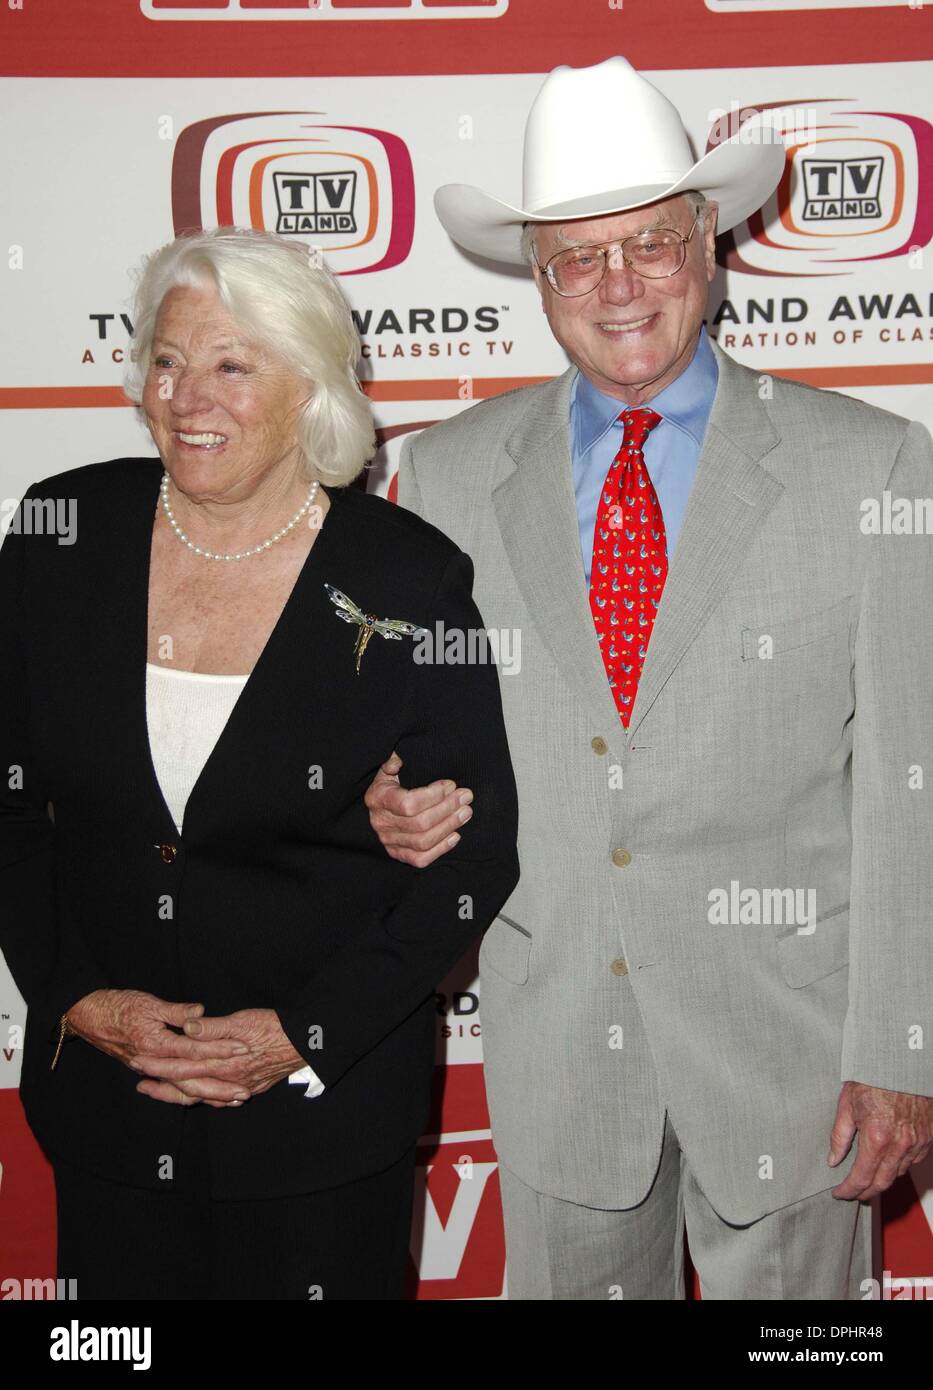 Mar. 19, 2006 - Hollywood, California, U.S. - SANTA MONICA, CA MARCH 19, 2006 (SSI) - -.Actor Larry Hagman and his wife Maj Axelsson pose for photographers, during the 2006 TV LAND AWARDS, held at the Barker Hanger, on March 19, 2006, in Santa Monica, California.   / Super Star Images.  -   K47283MG(Credit Image: © Michael Germana/Globe Photos/ZUMAPRESS.com) Stock Photo